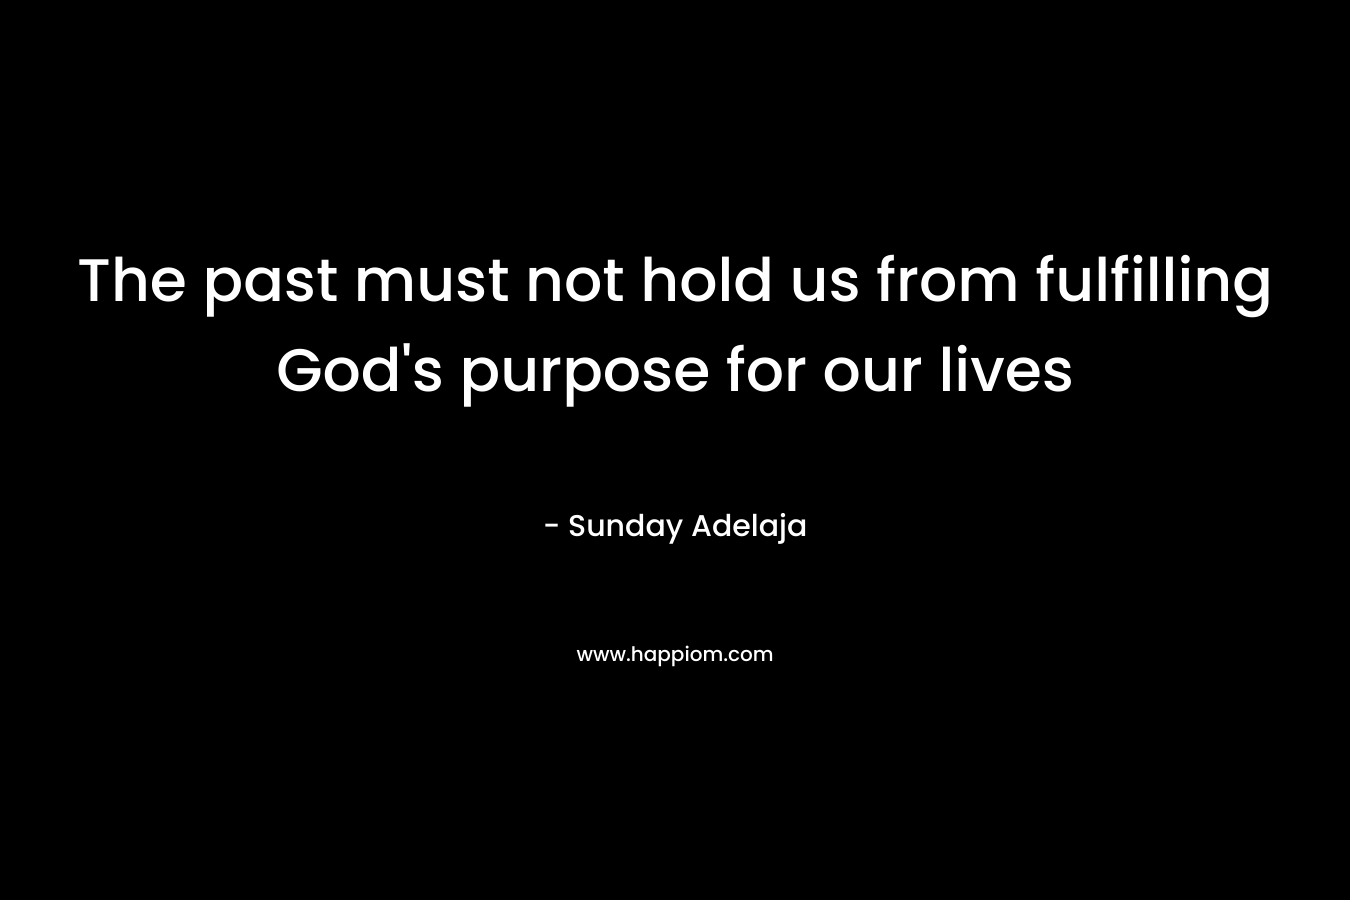 The past must not hold us from fulfilling God's purpose for our lives